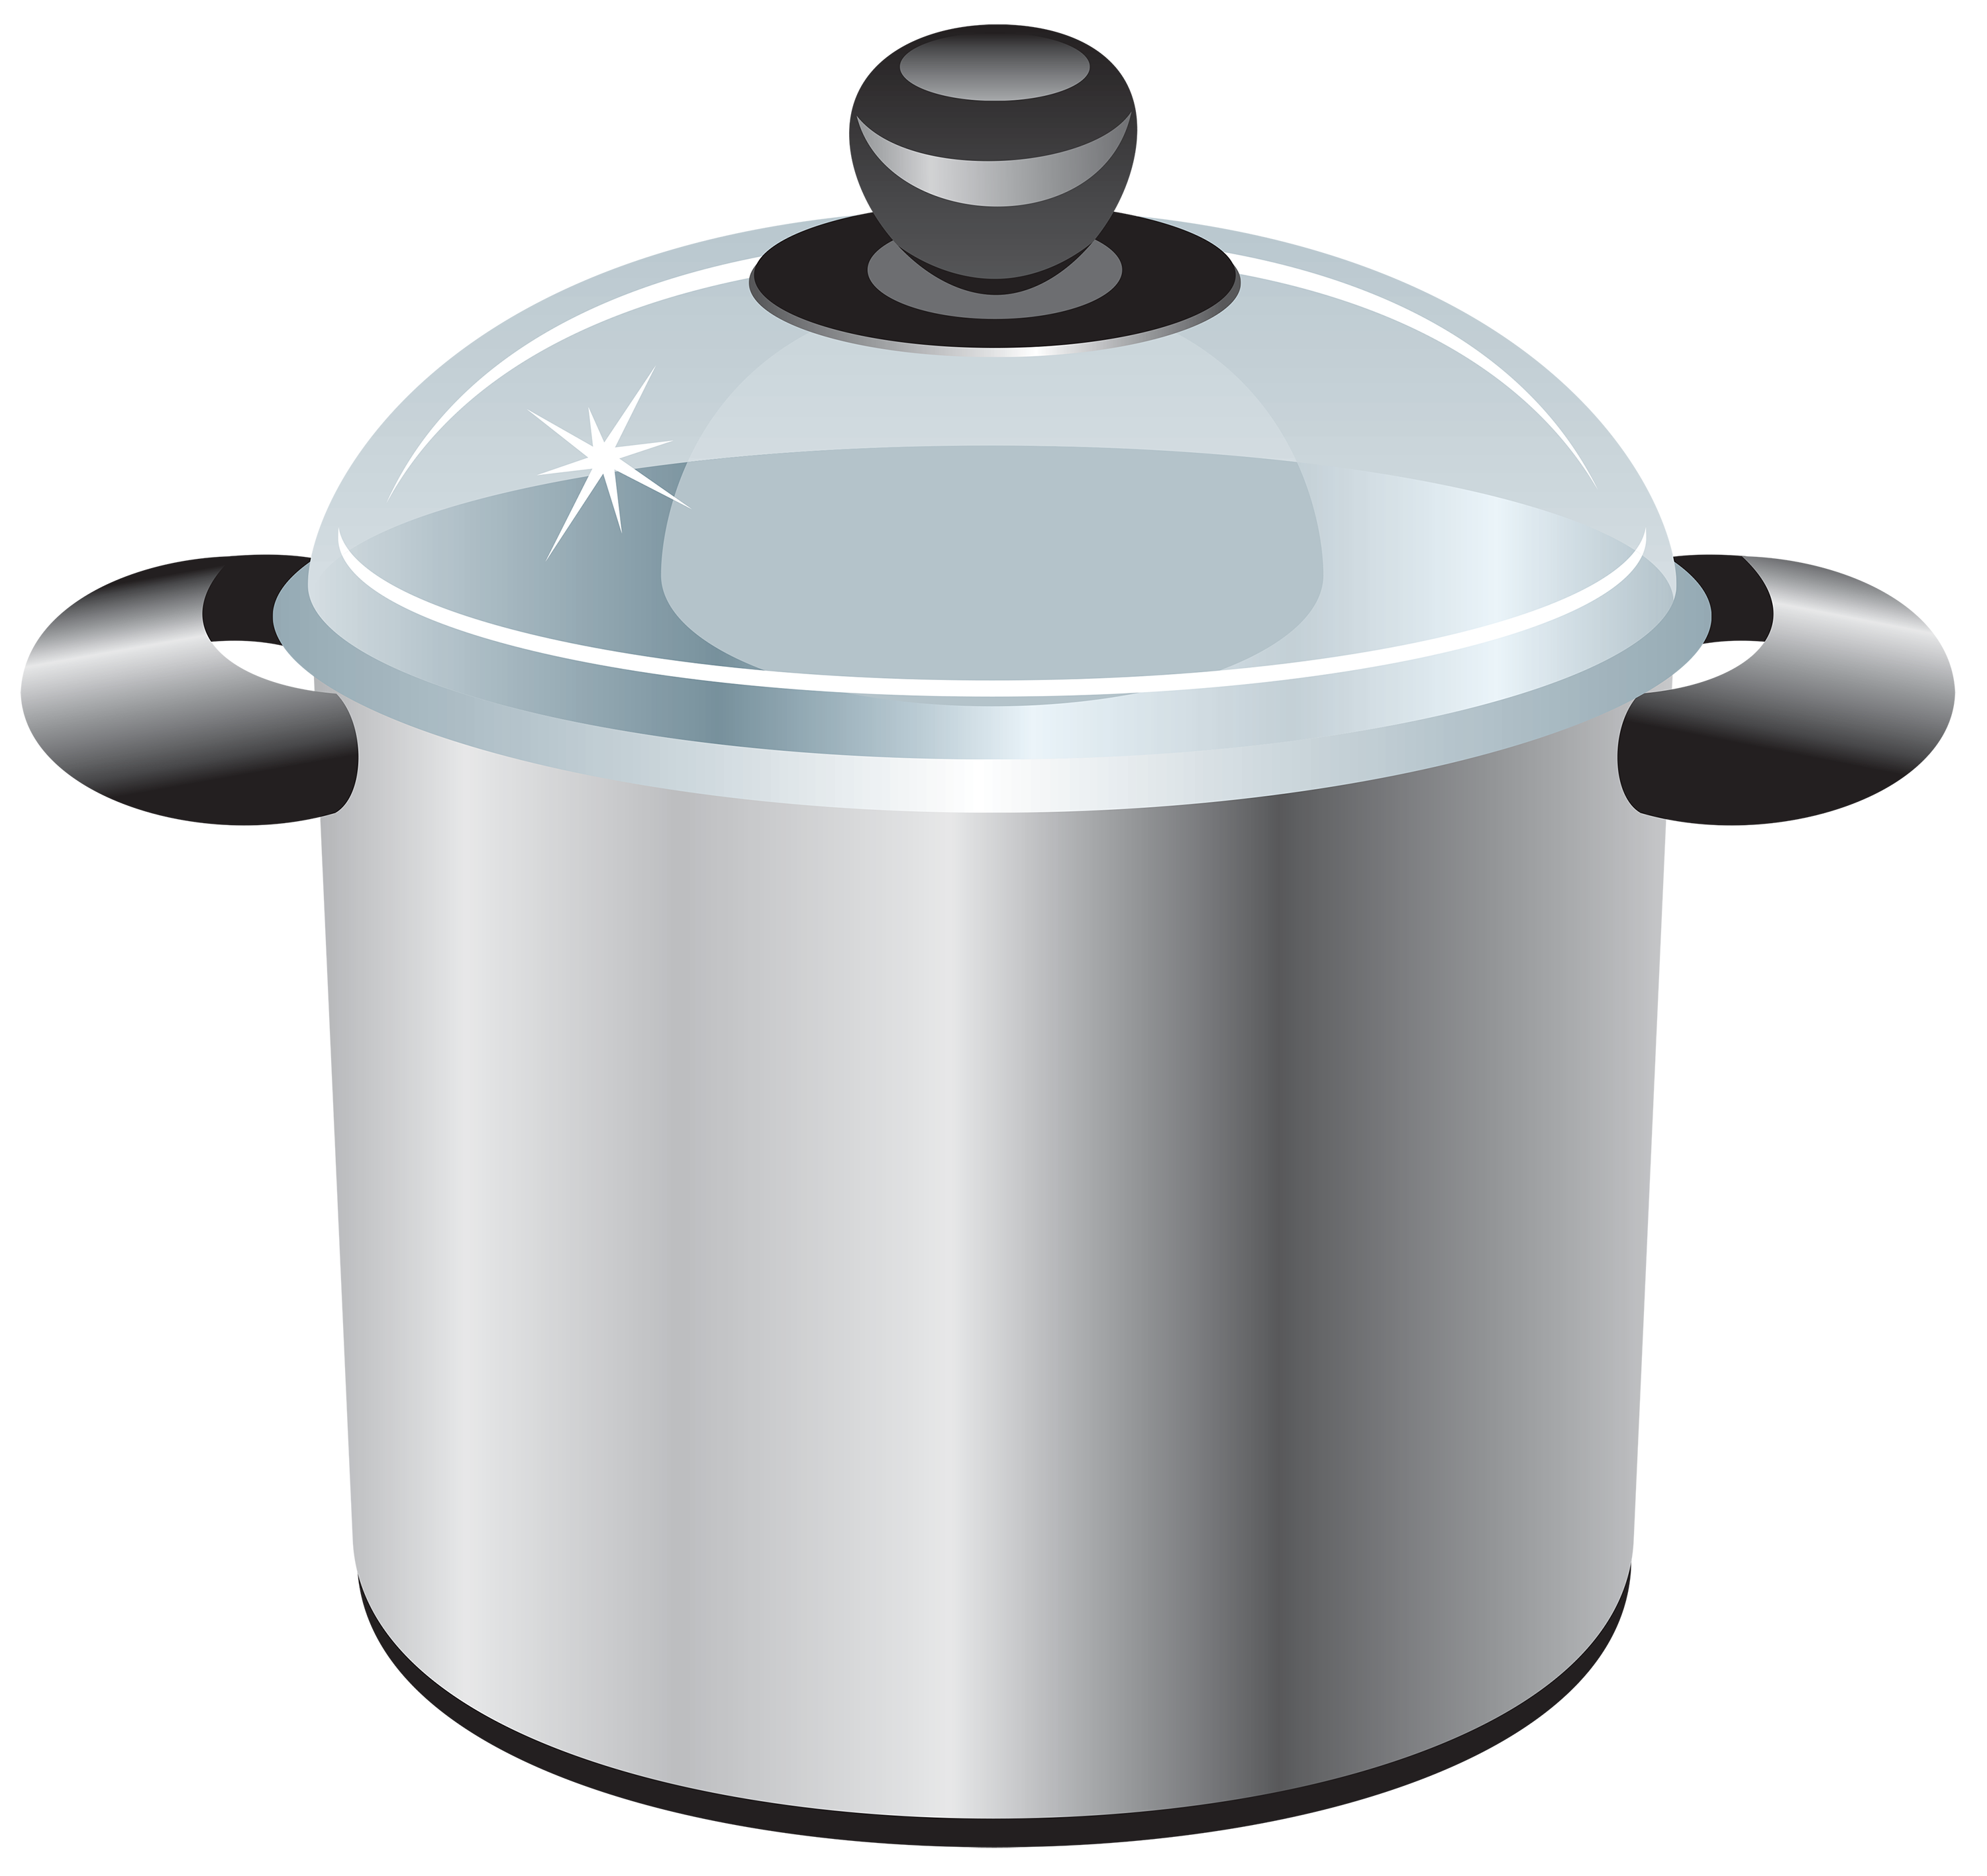 Cook clipart cookery tool. Silver cooking pot best